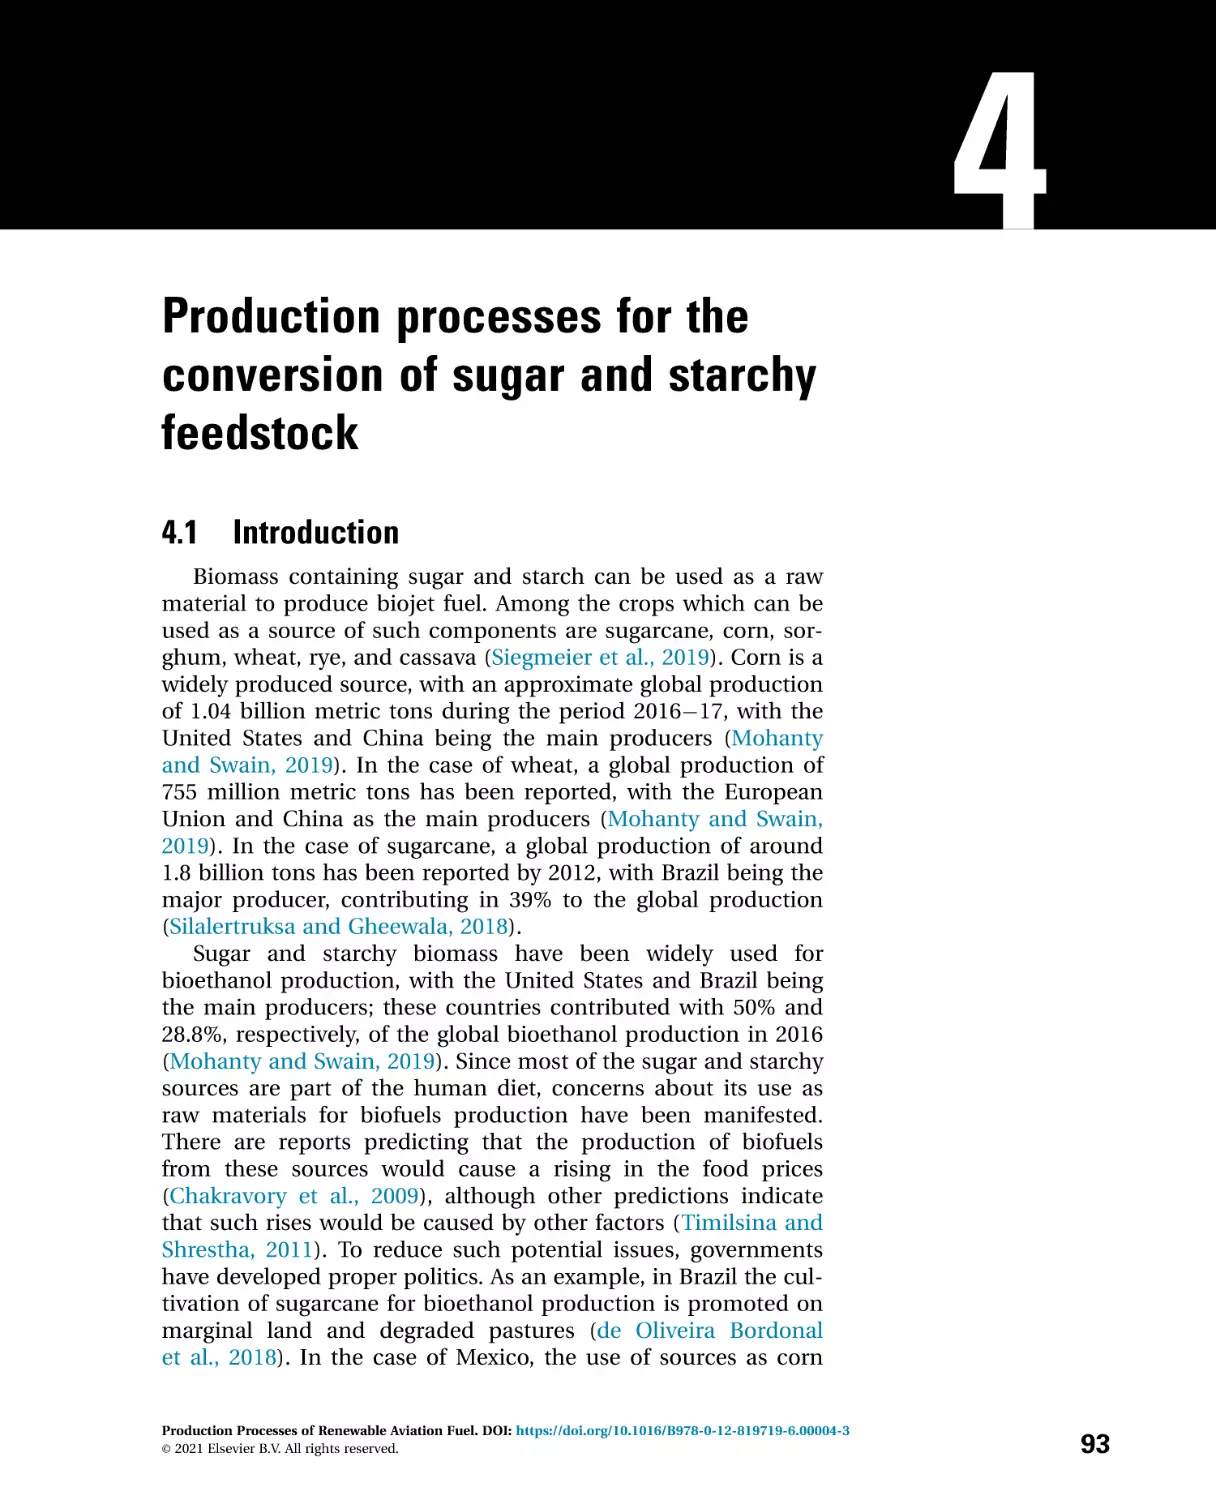 4---Production-processes-for-the-conversion_2021_Production-Processes-of-Ren
4 Production processes for the conversion of sugar and starchy feedstock
4.1 Introduction